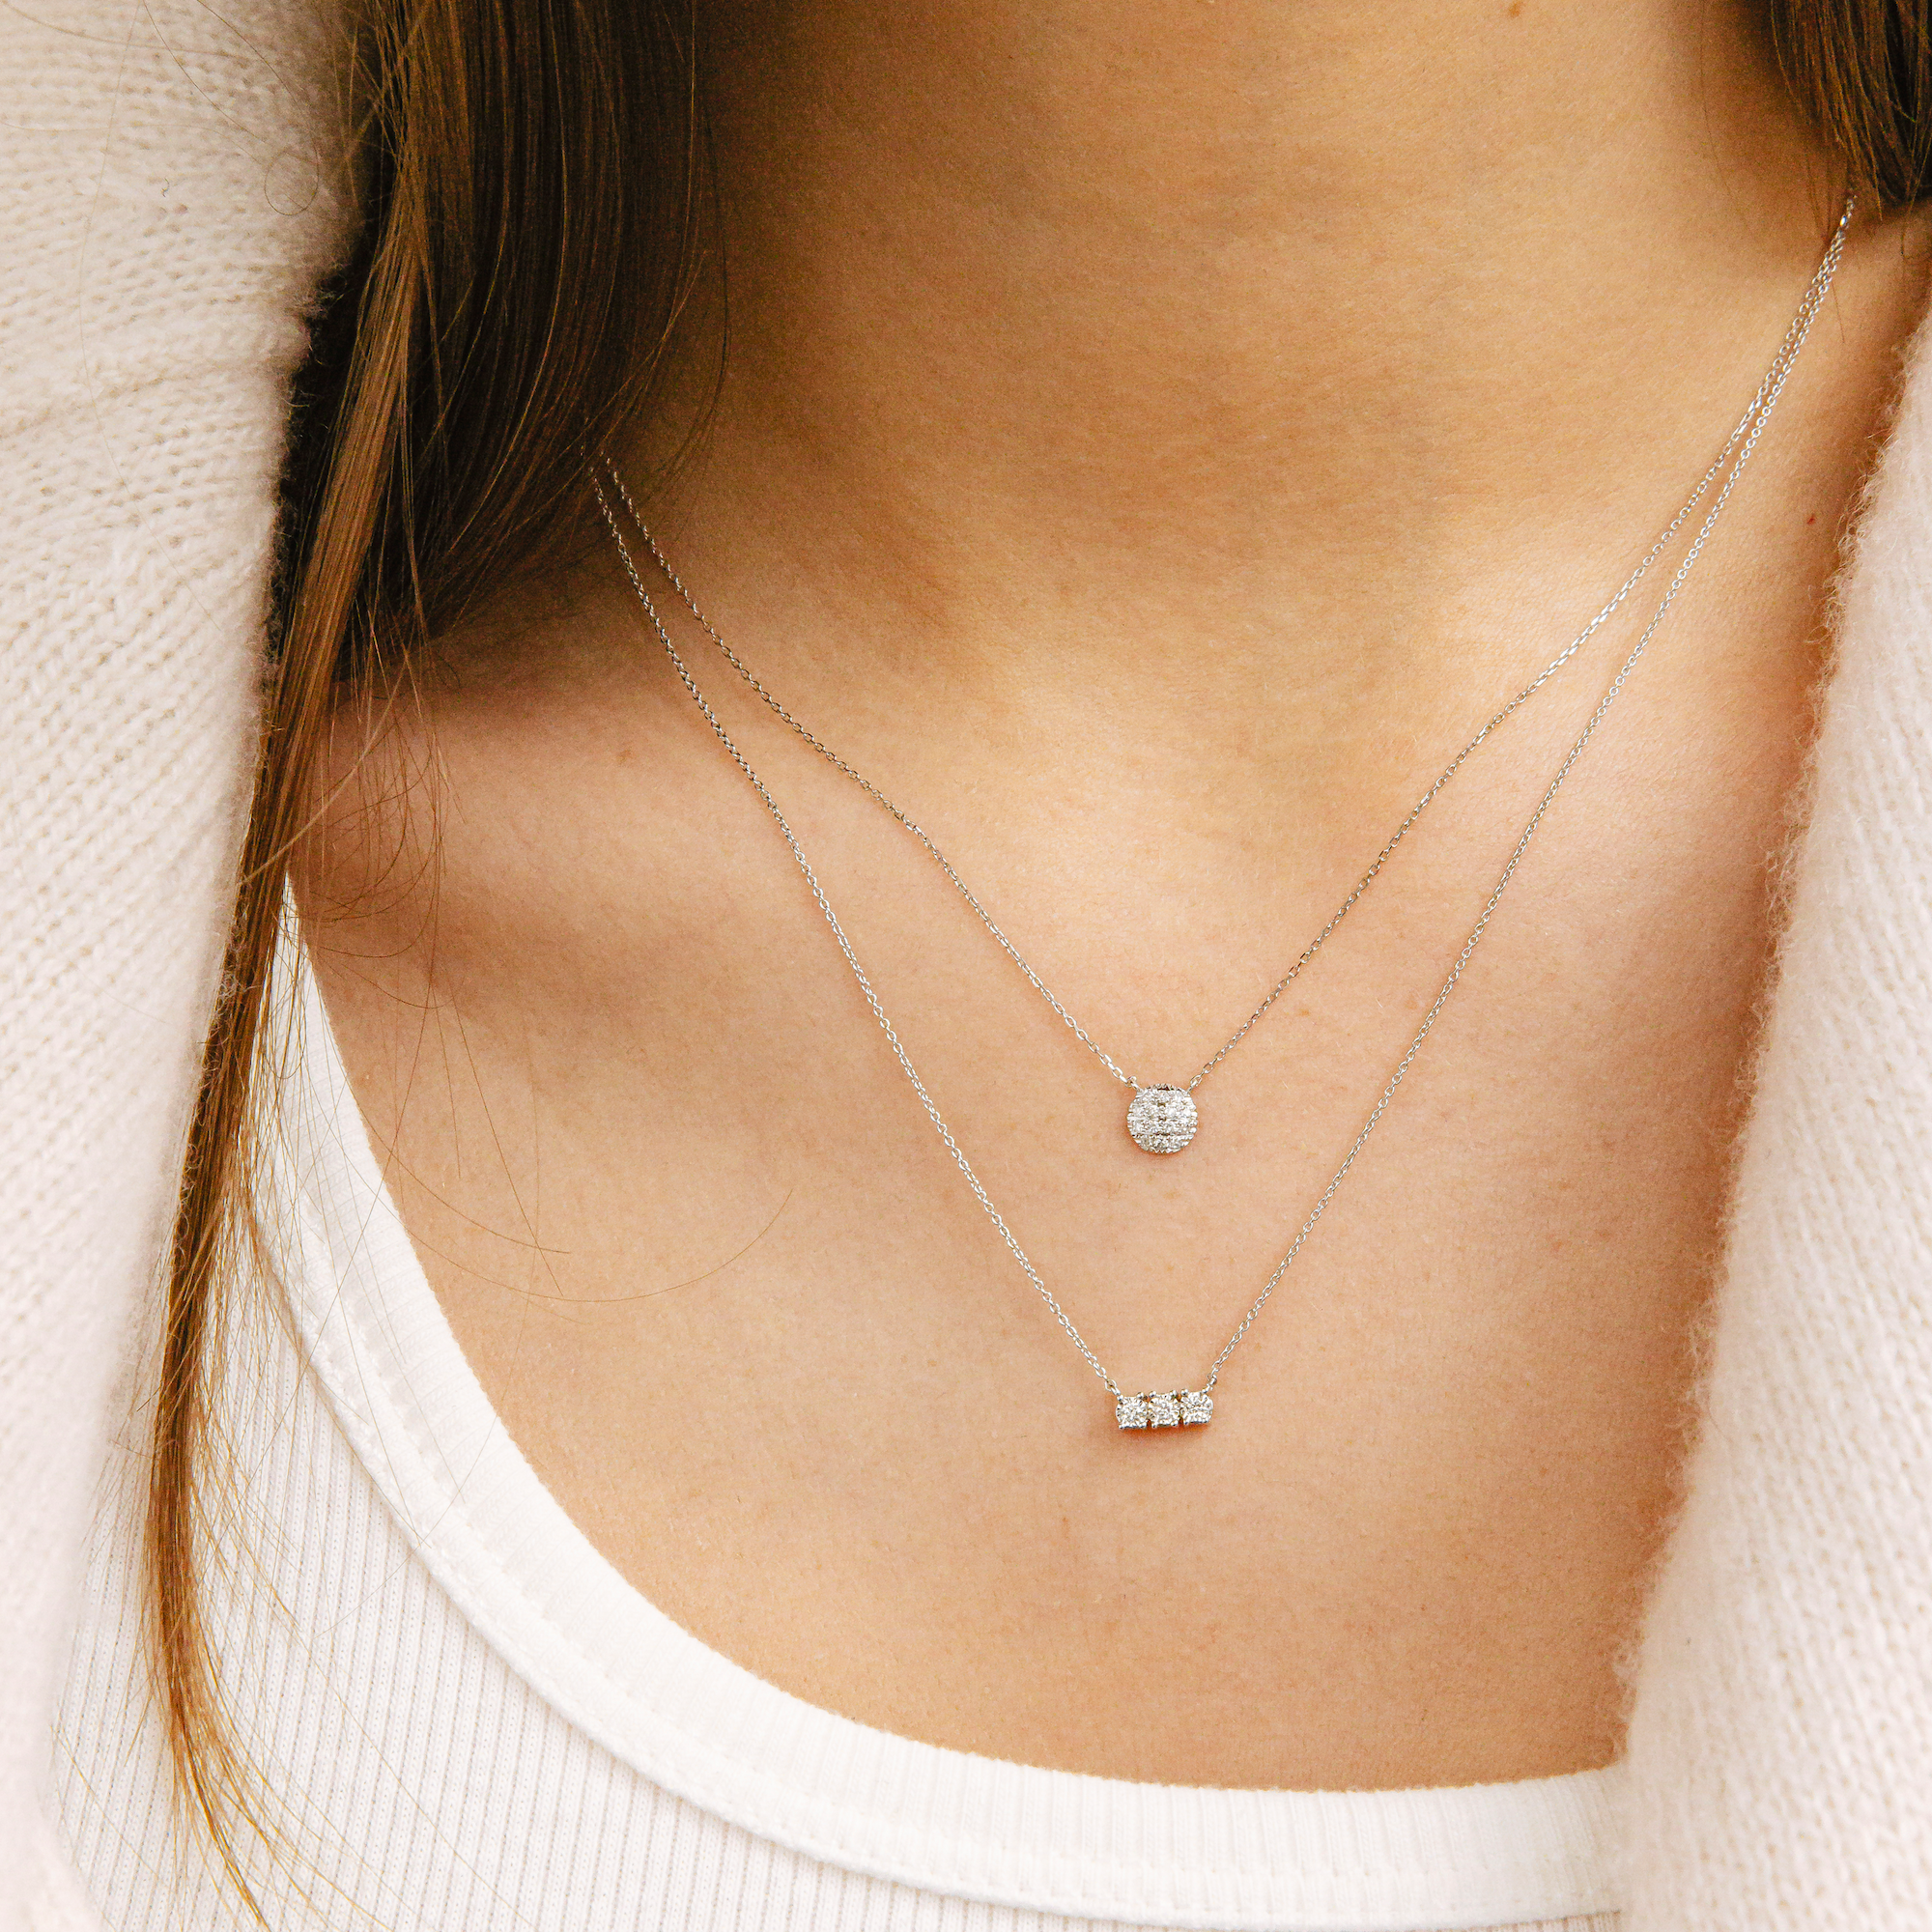 White Gold-3^Diamond Bar Necklaces: Ava Bea Bar Necklace in White Gold